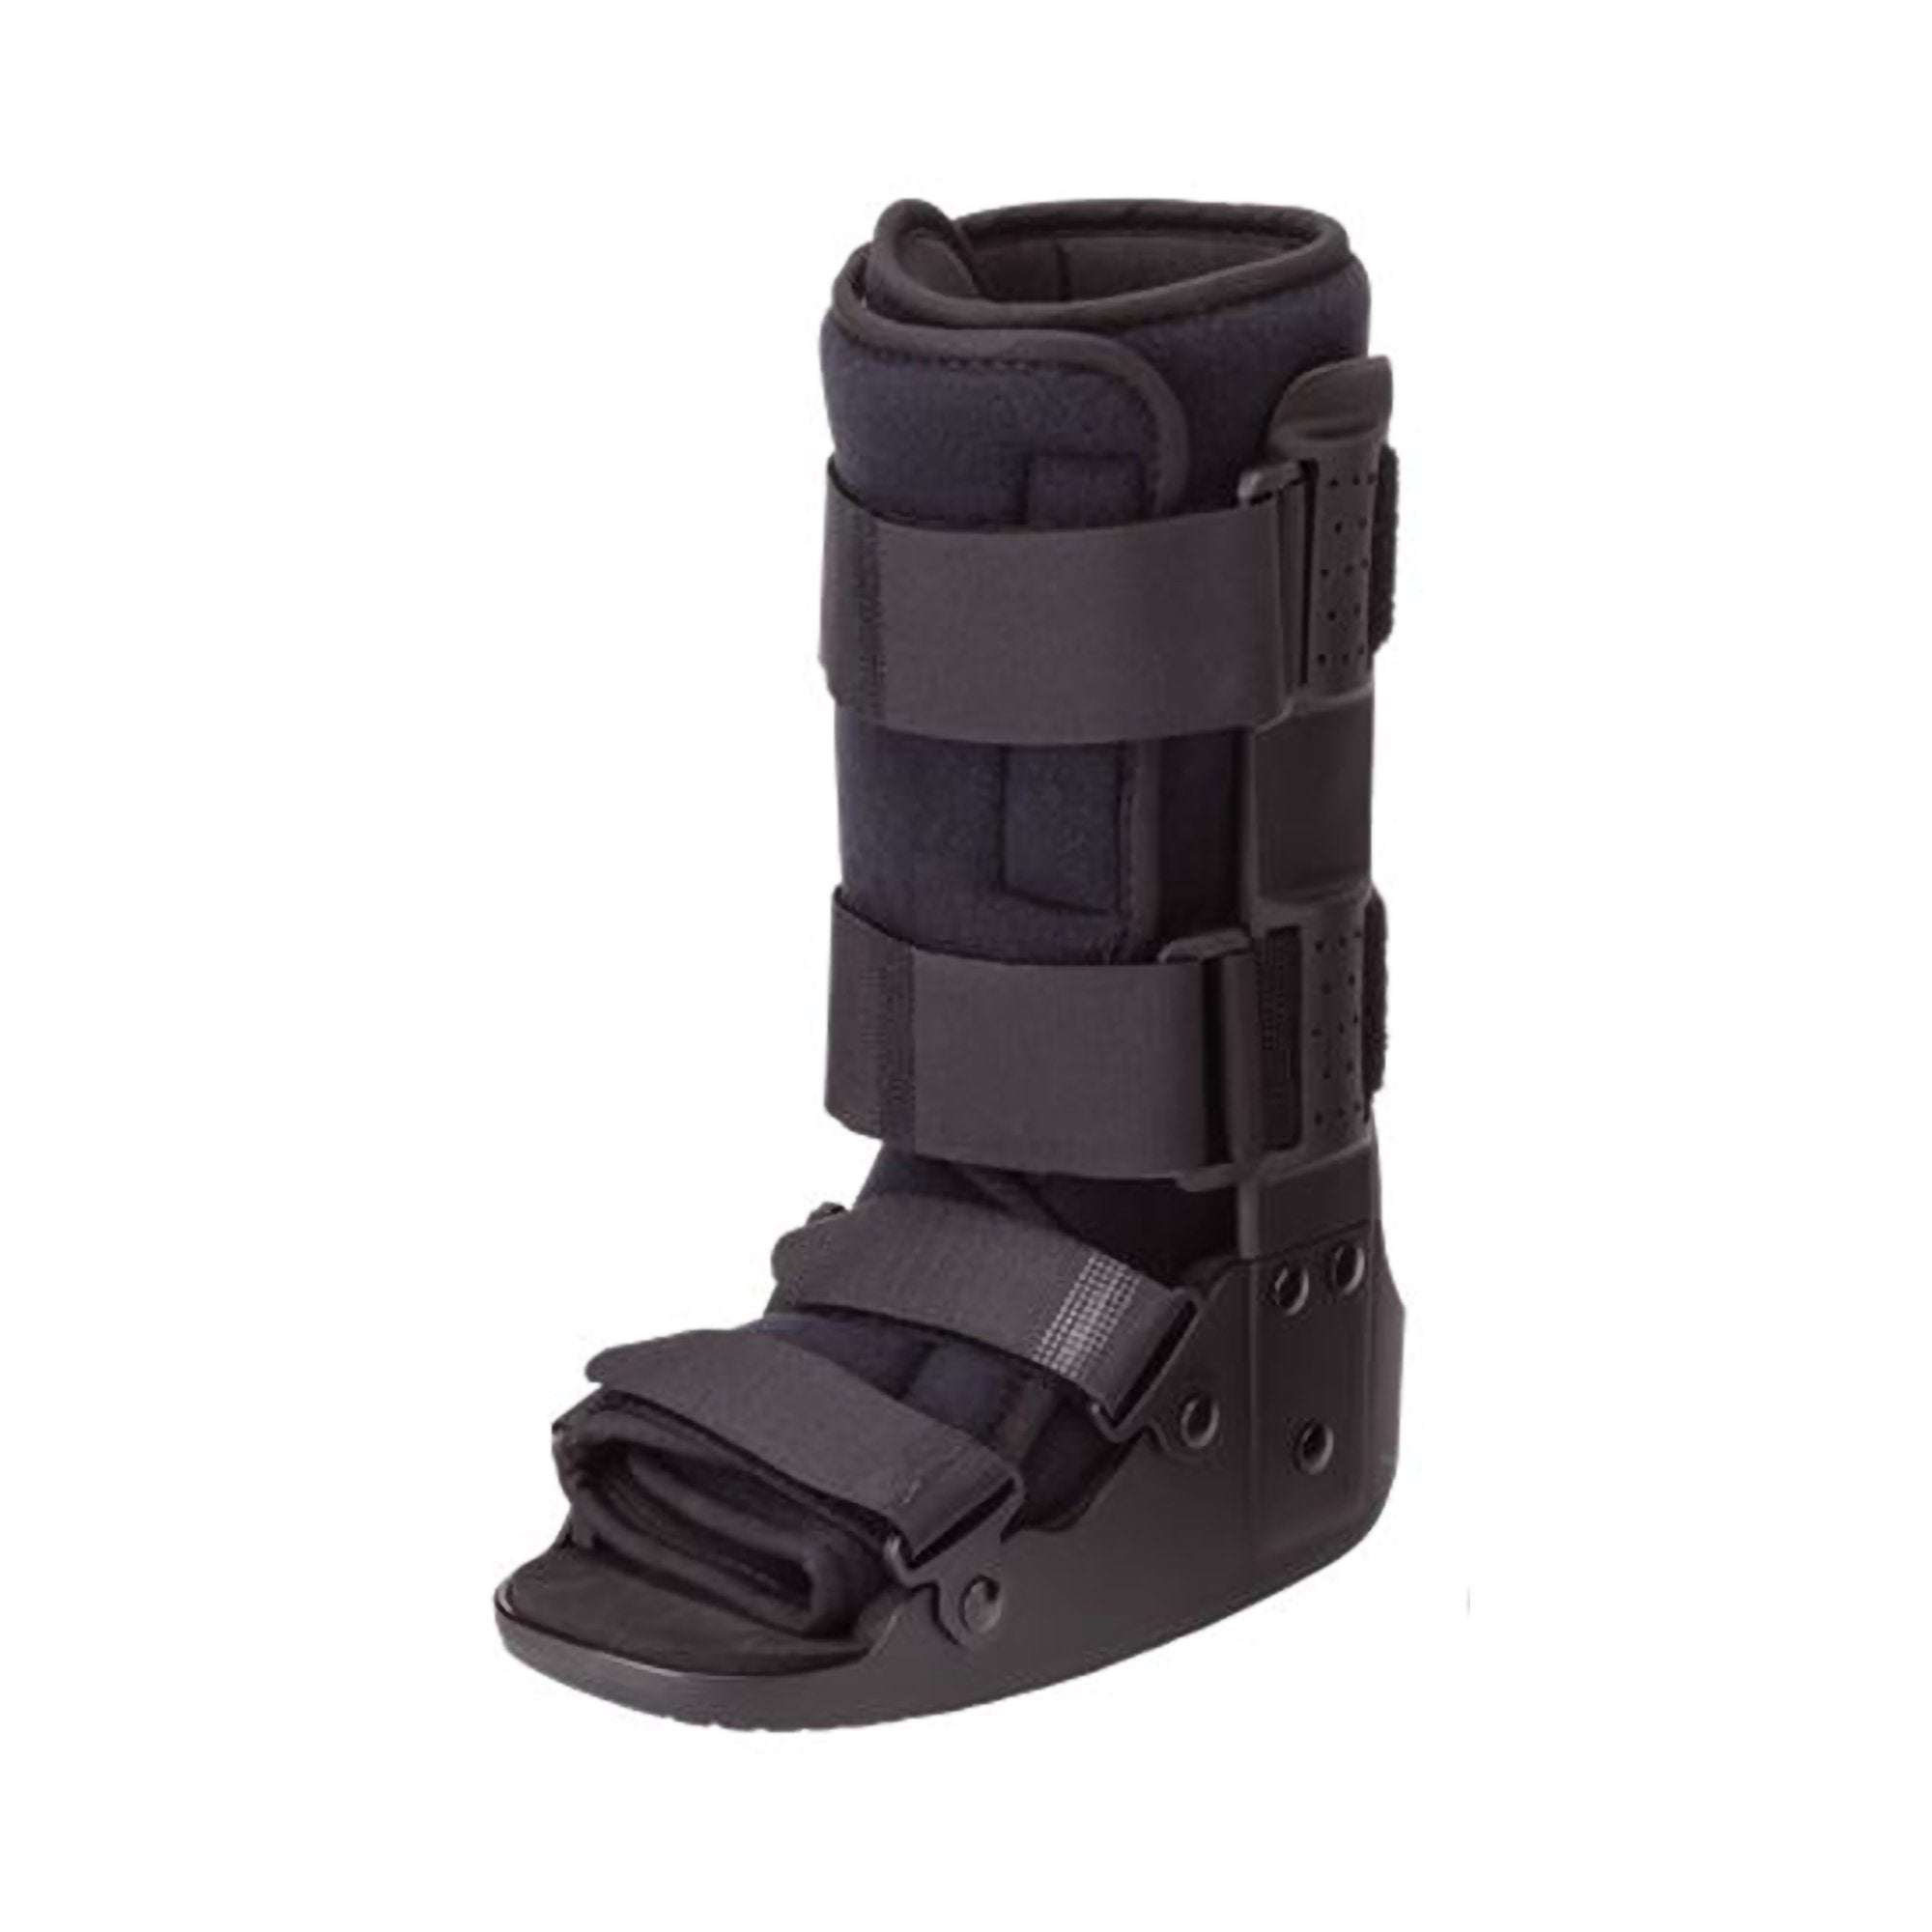 Walker Boot Ossur® Non-Pneumatic Large Left or Right Foot Pediatric